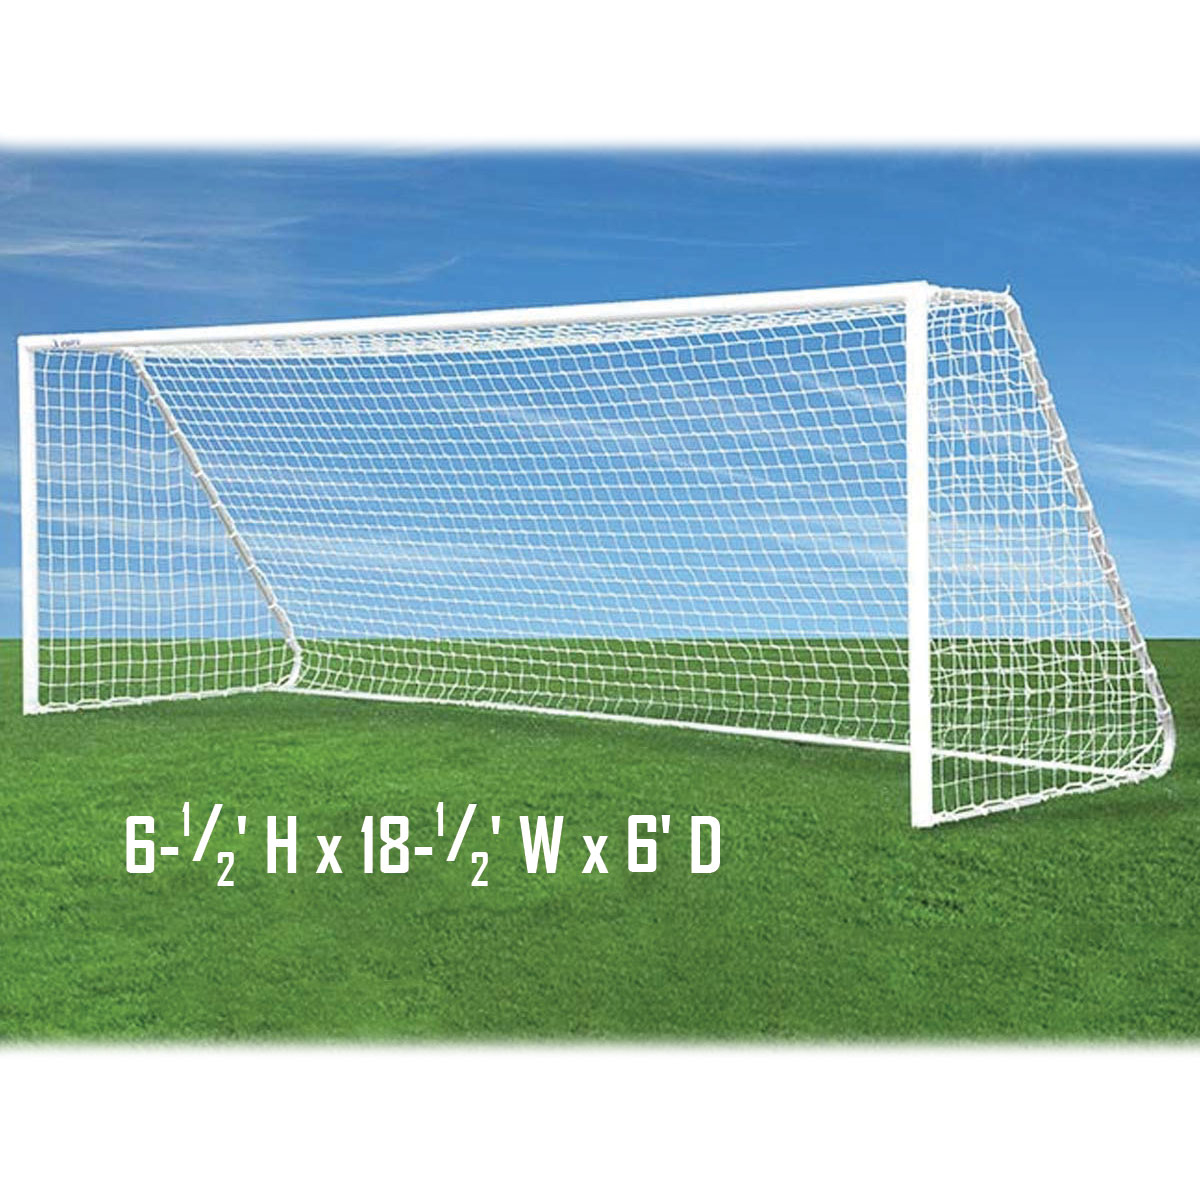 Pair of Soccer Nets for Jaypro Ultra-Light Classic Goals - 18-1/2' wide